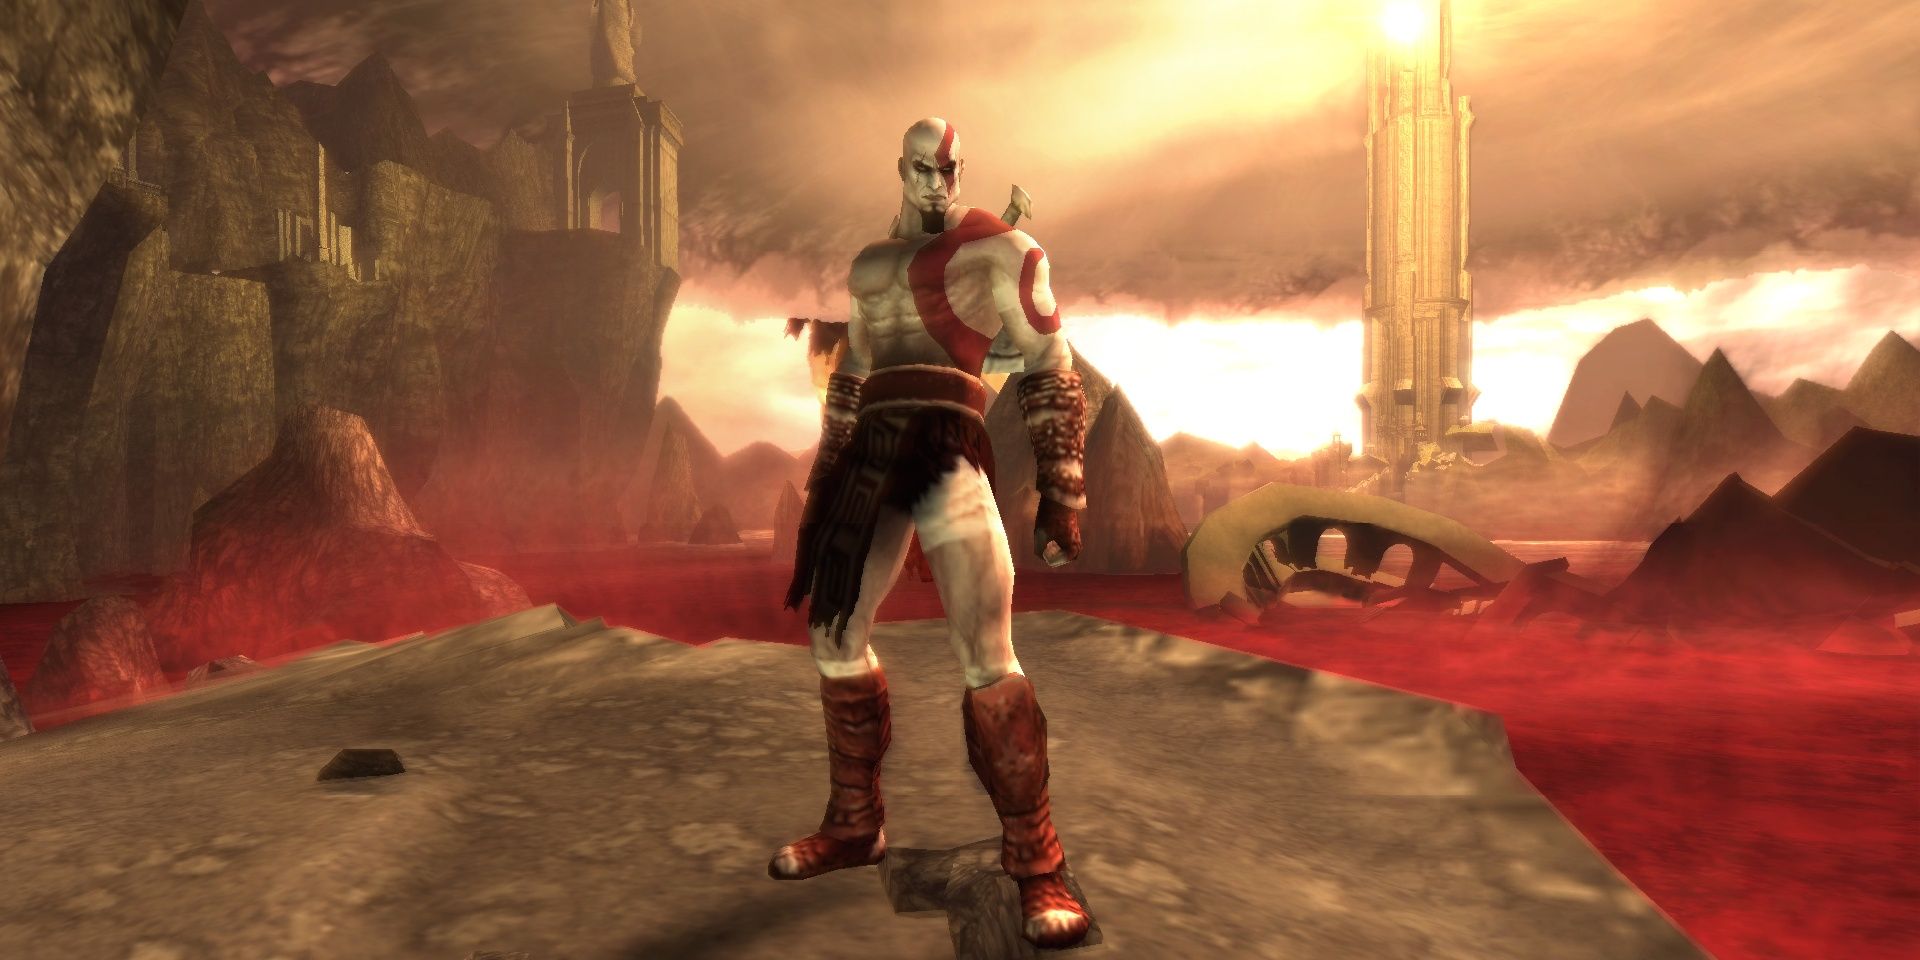 Kratos stands in Hell in God Of War Chains Of Olympus.